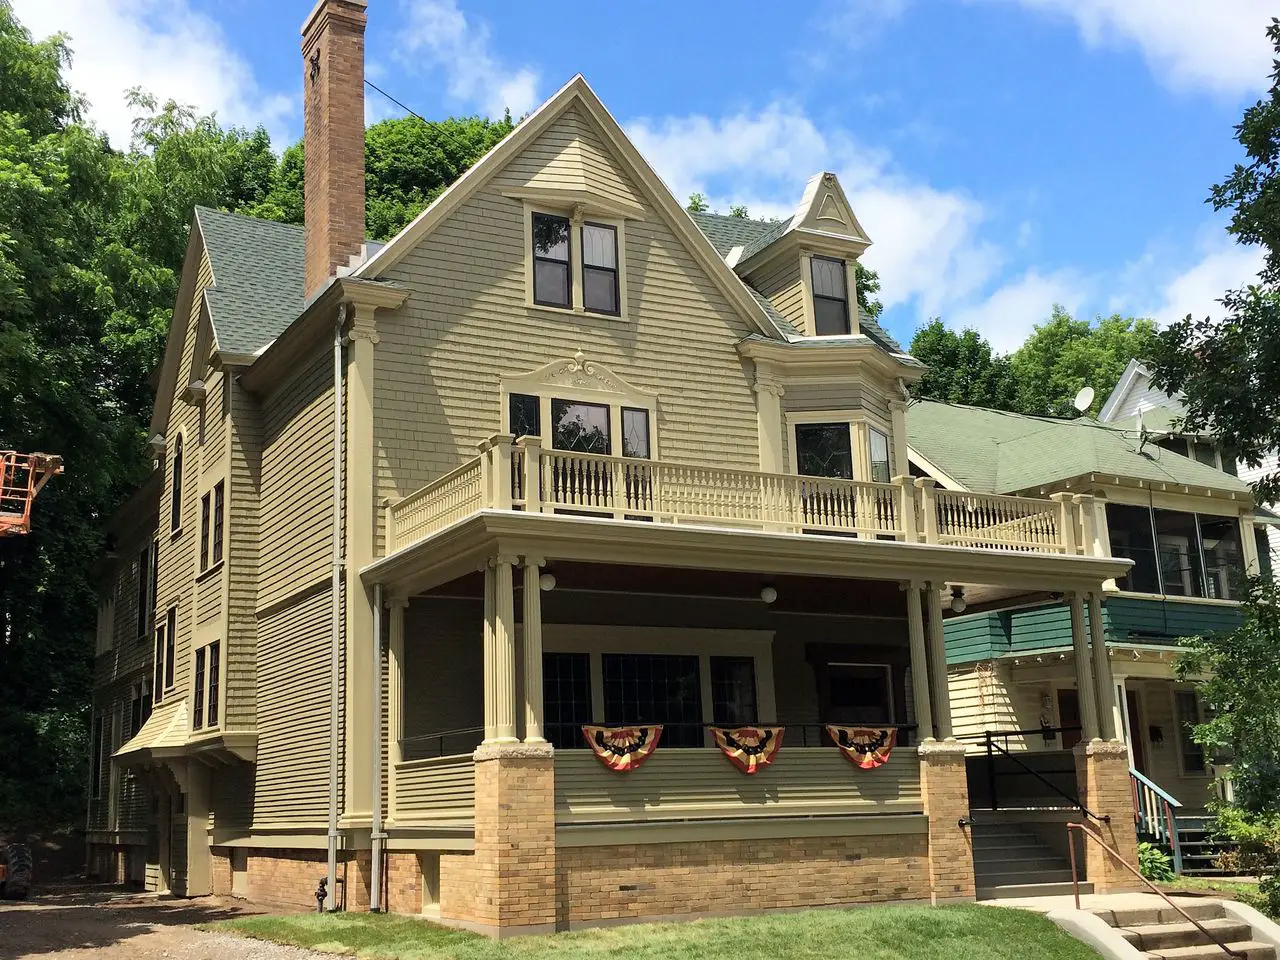 Stickley house restoration in Syracuse gets $500,000 federal grant ...